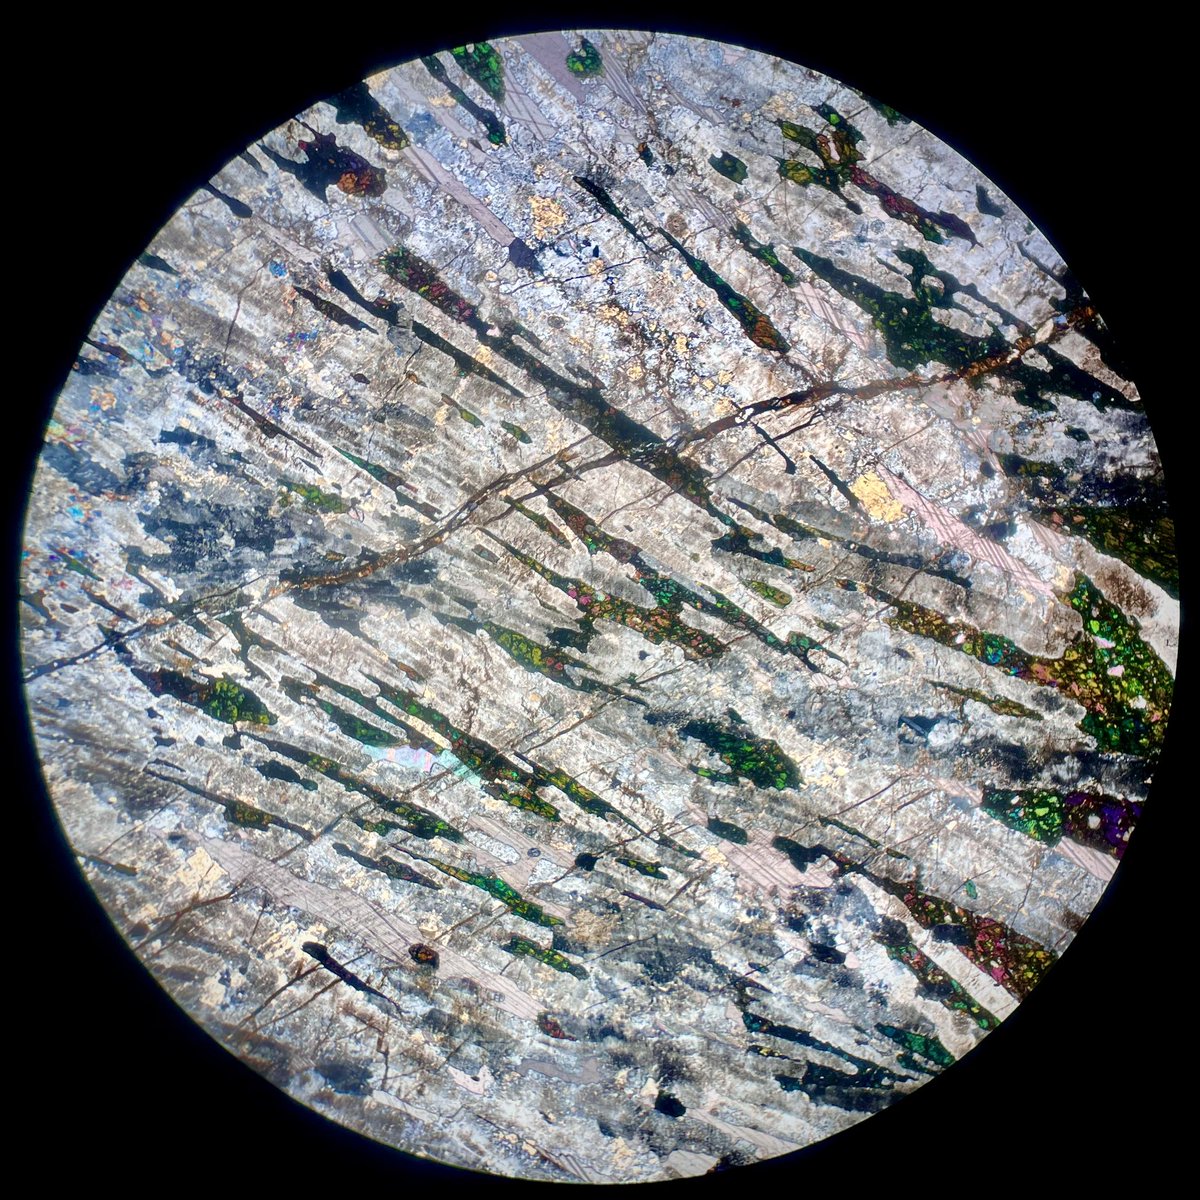 #ThinSectionThursday is here! 

How do you think these textures can be formed? 

Aegerine, K-feldspar and calcite, carbonatized syenite, Marinkas Quellen Complex, Namibia.

#science #colors #rocks #geology #petrography #petrology #nature #minerals  #photography #photo #microscopy